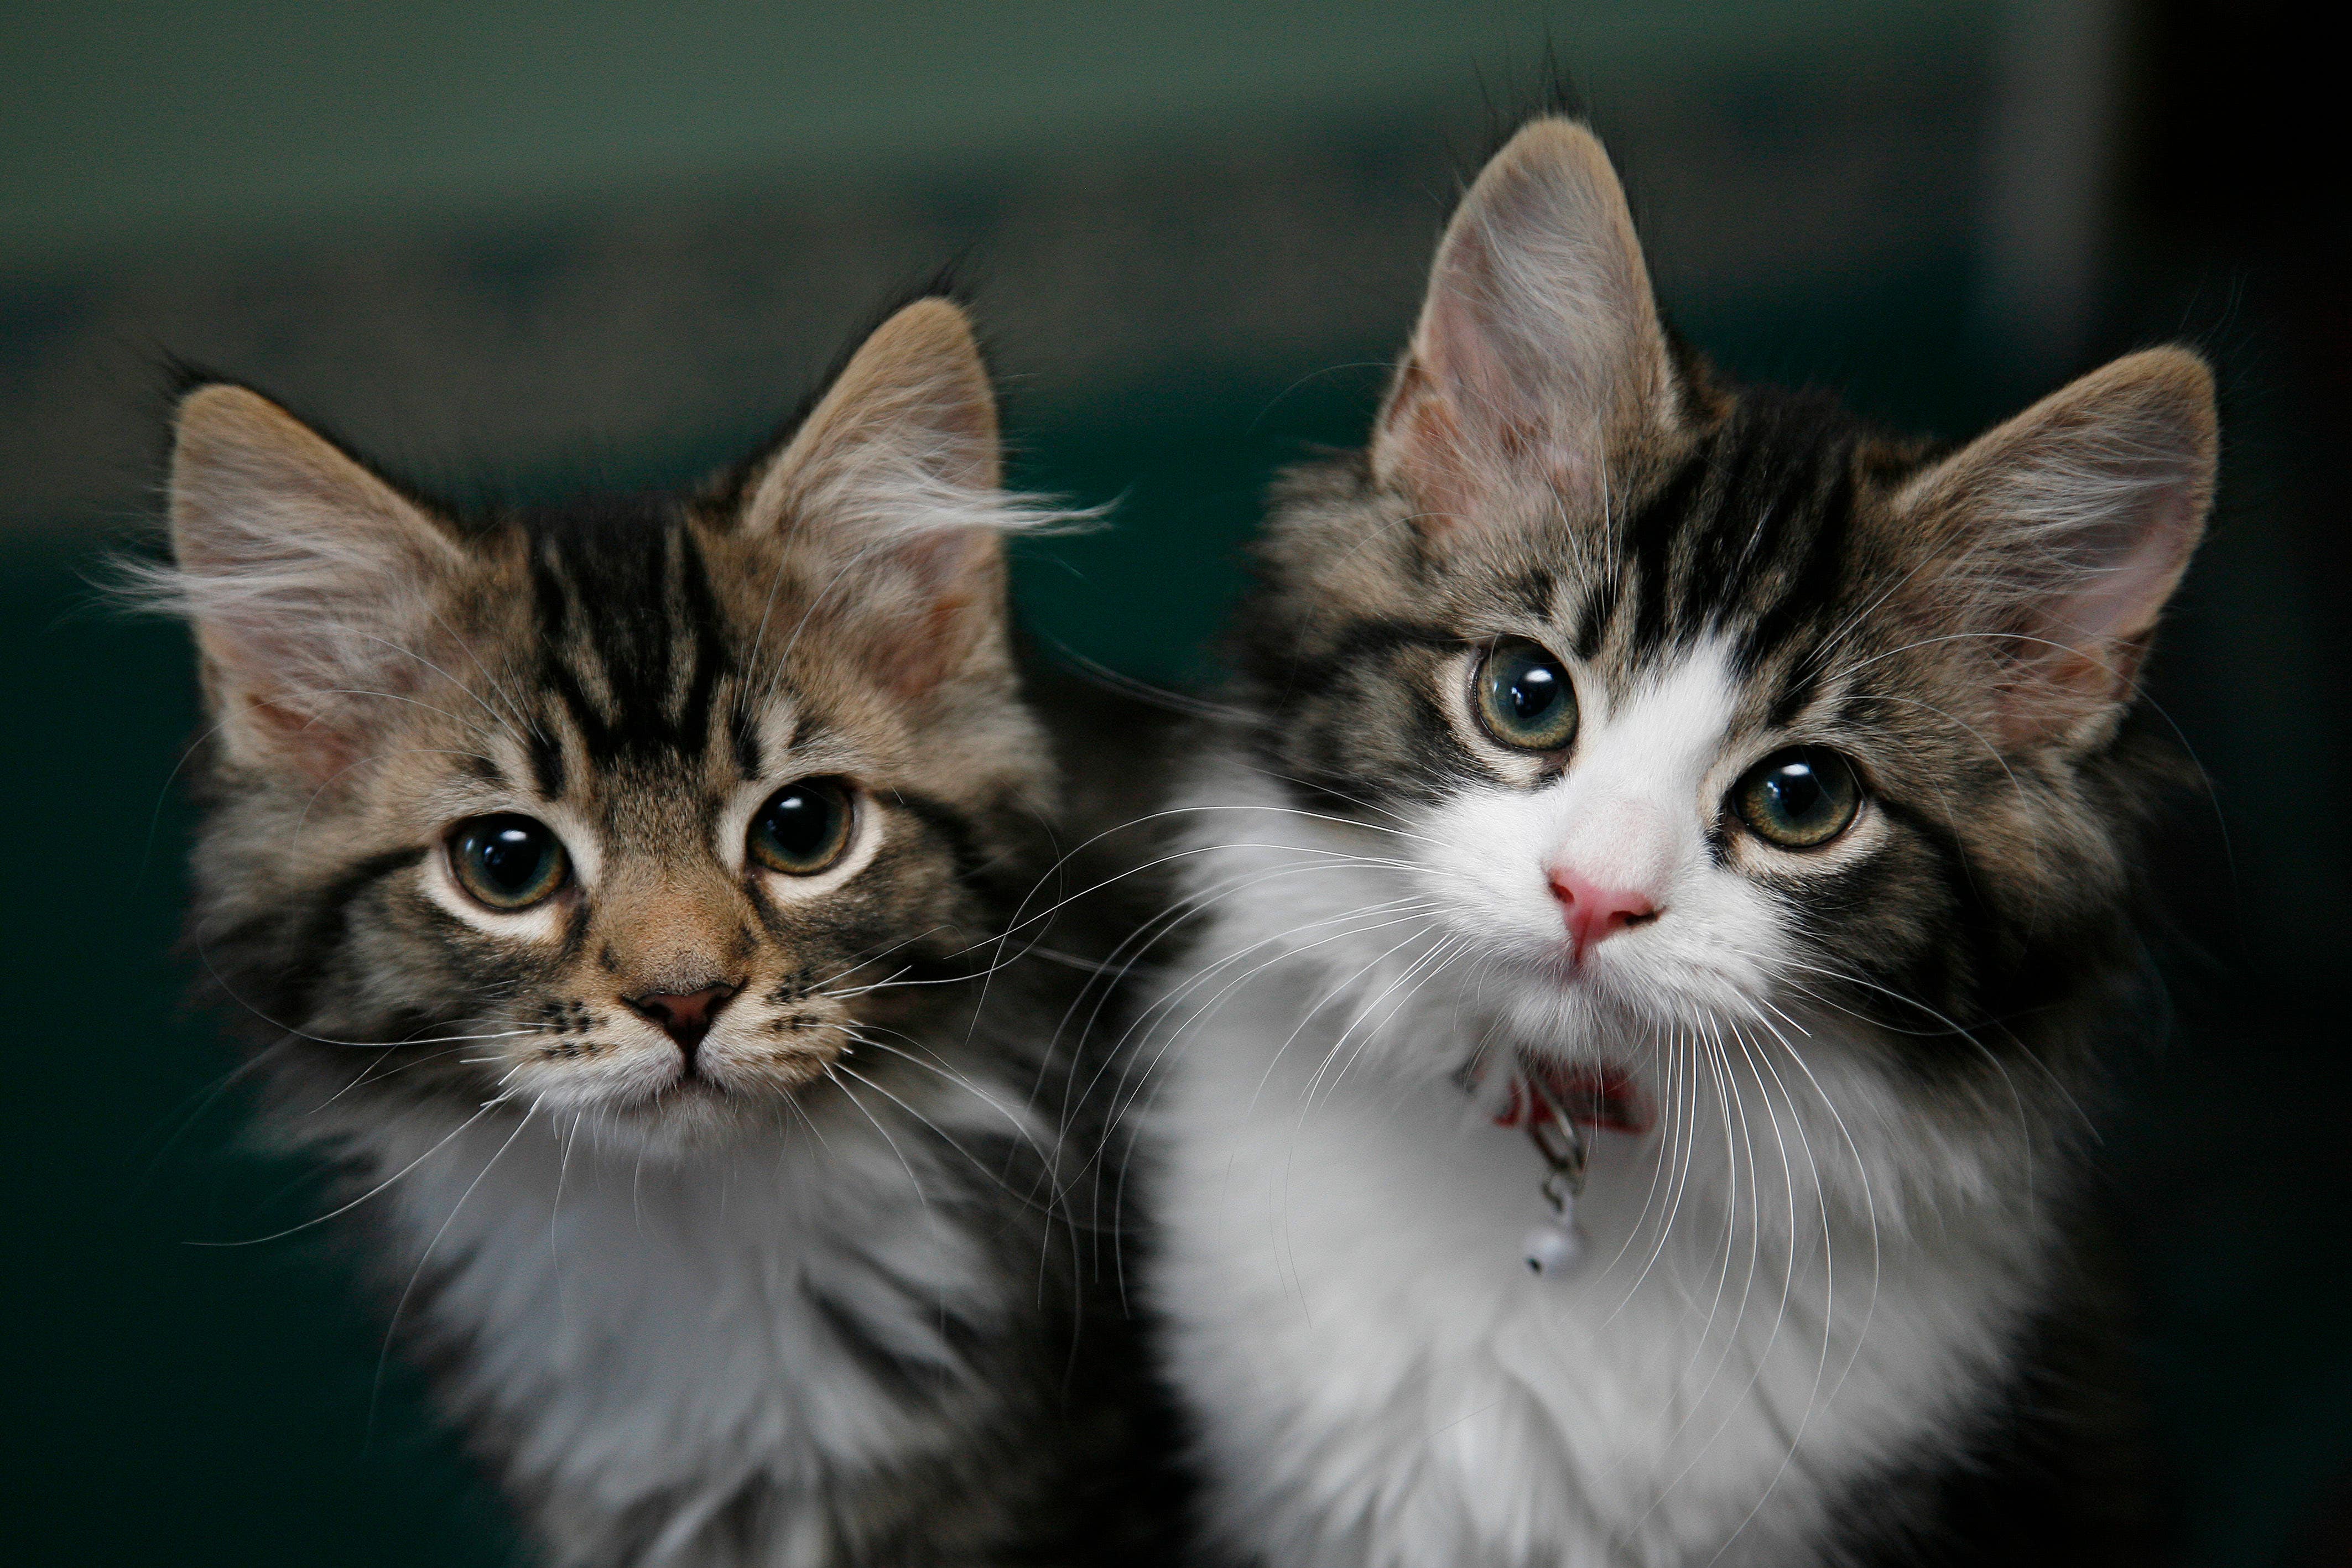 Pet owners in Swindon have been left “devastated” after four cats were poisoned